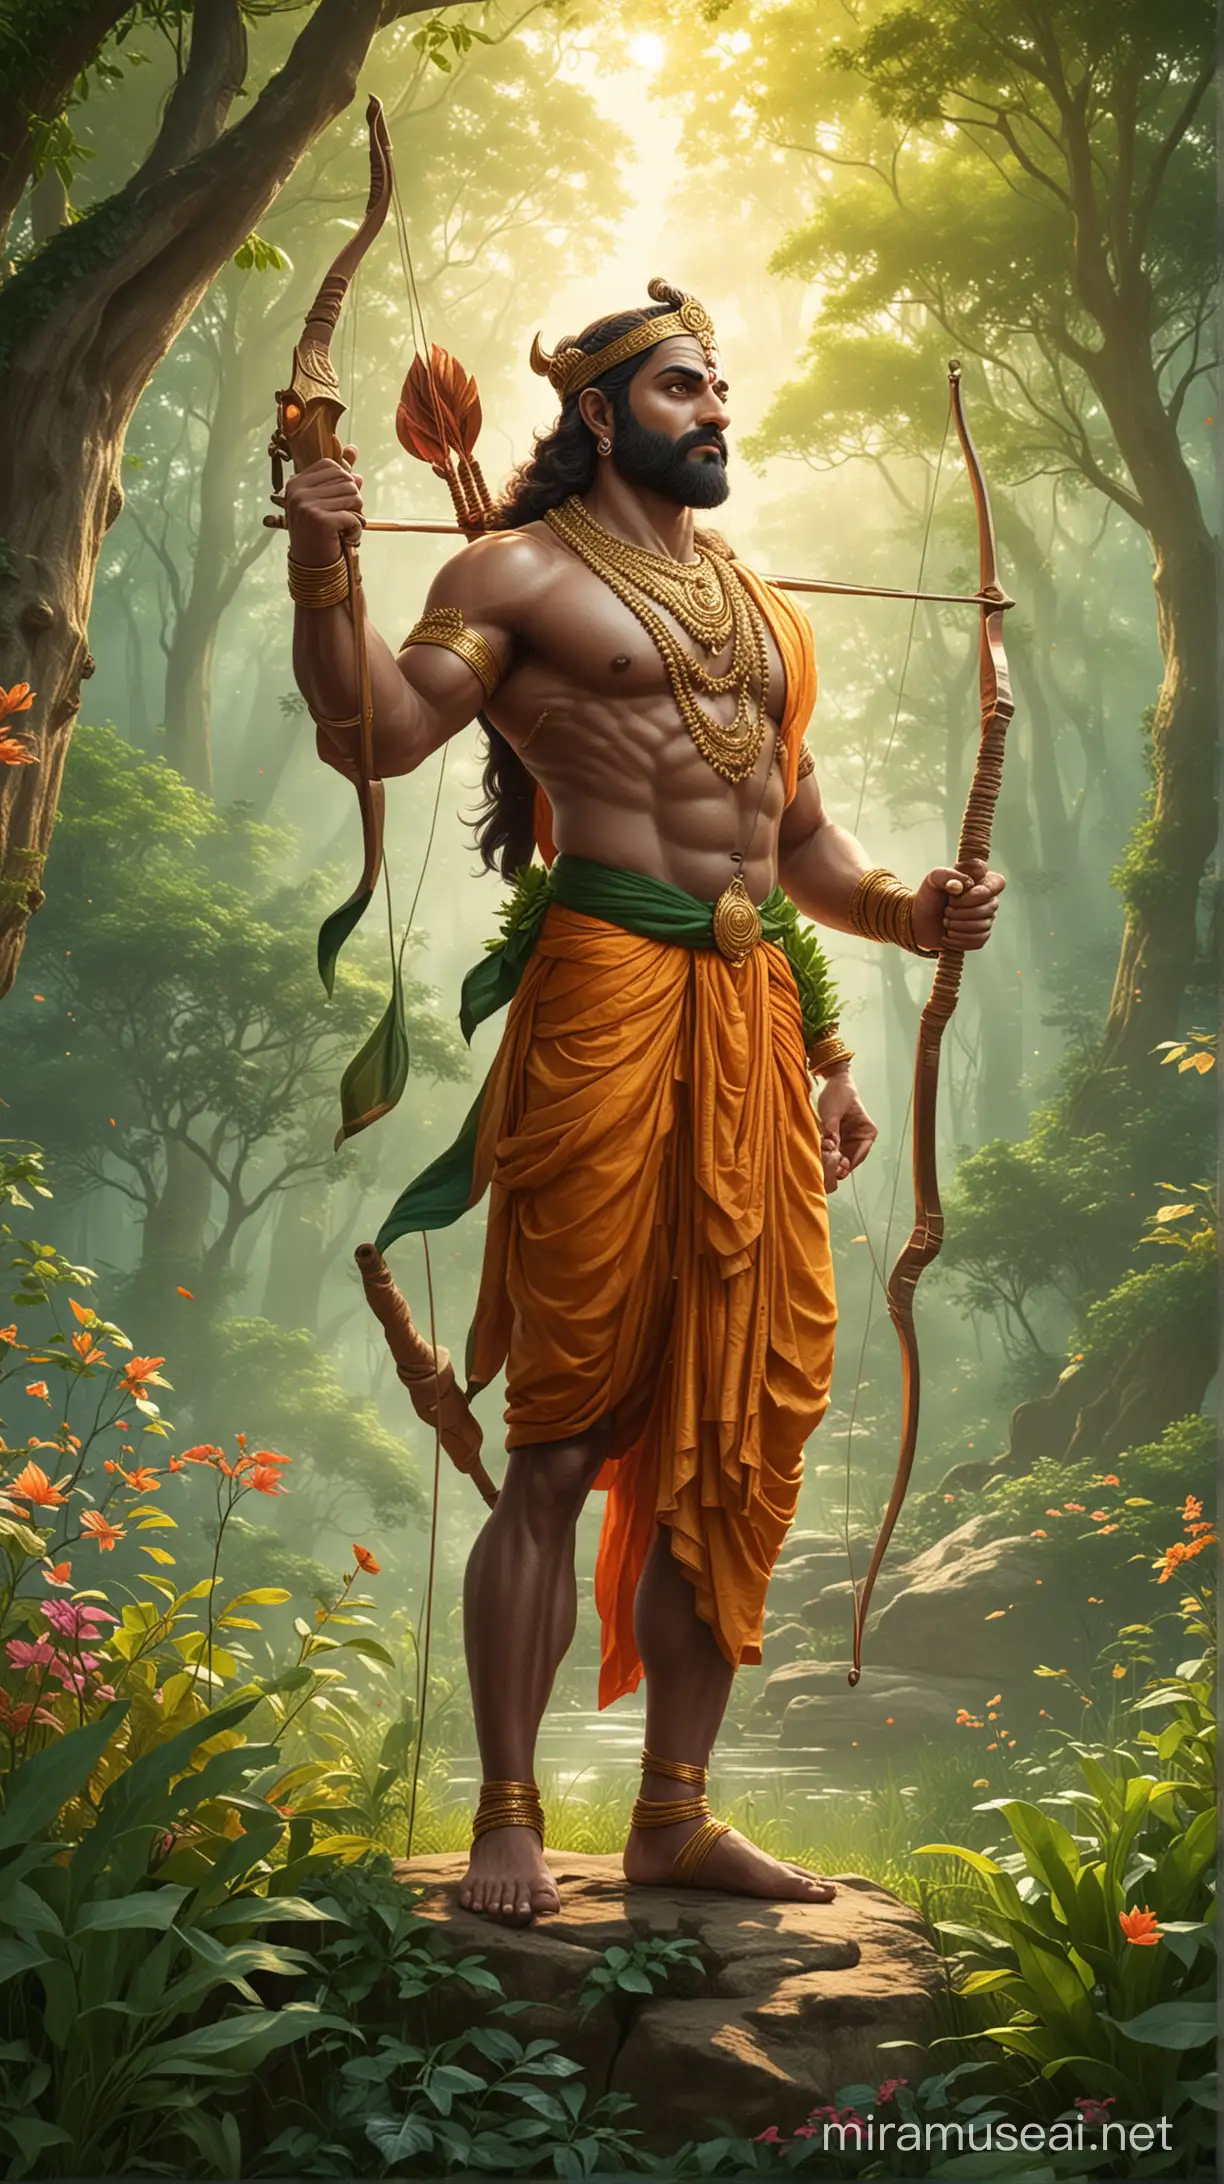 Create a detailed and vibrant illustration depicting Lord Ram standing majestically with a serene expression, holding his iconic bow, the mighty "Kodanda," while being surrounded by lush greenery and divine light, evoking a sense of tranquility and divine grace.